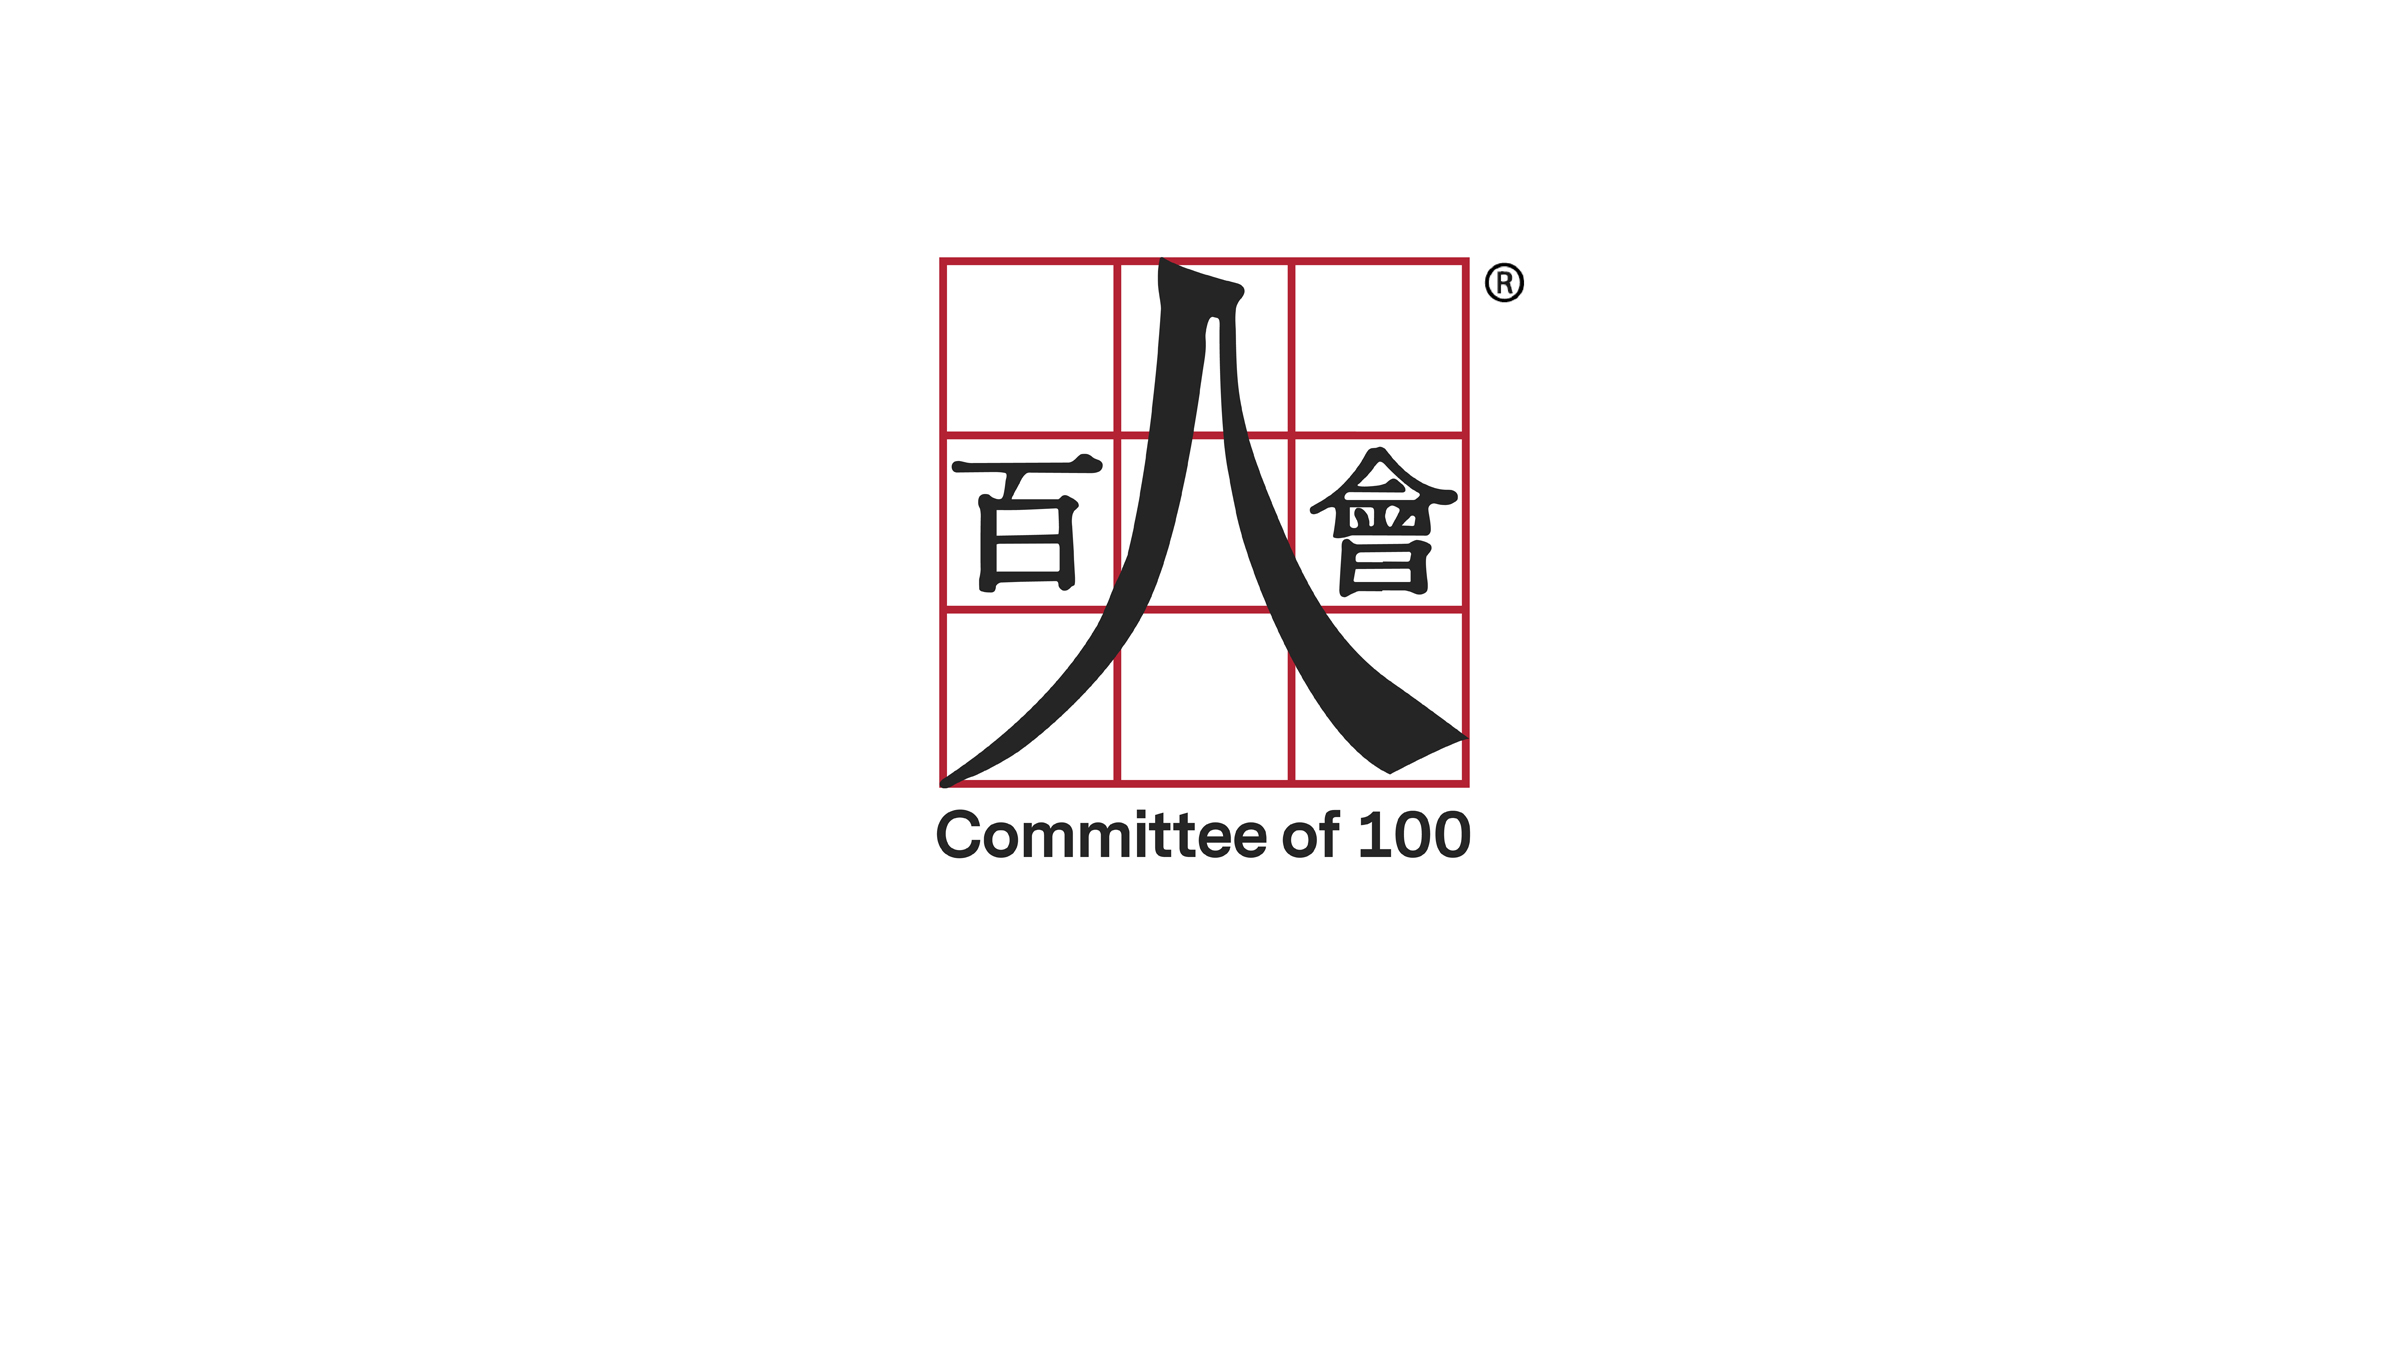 Committee of 100 Comments on the Presidential Memorandum Condemning and Combating Racism, Xenophobia, and Intolerance Against Asian Americans and Pacific Islanders